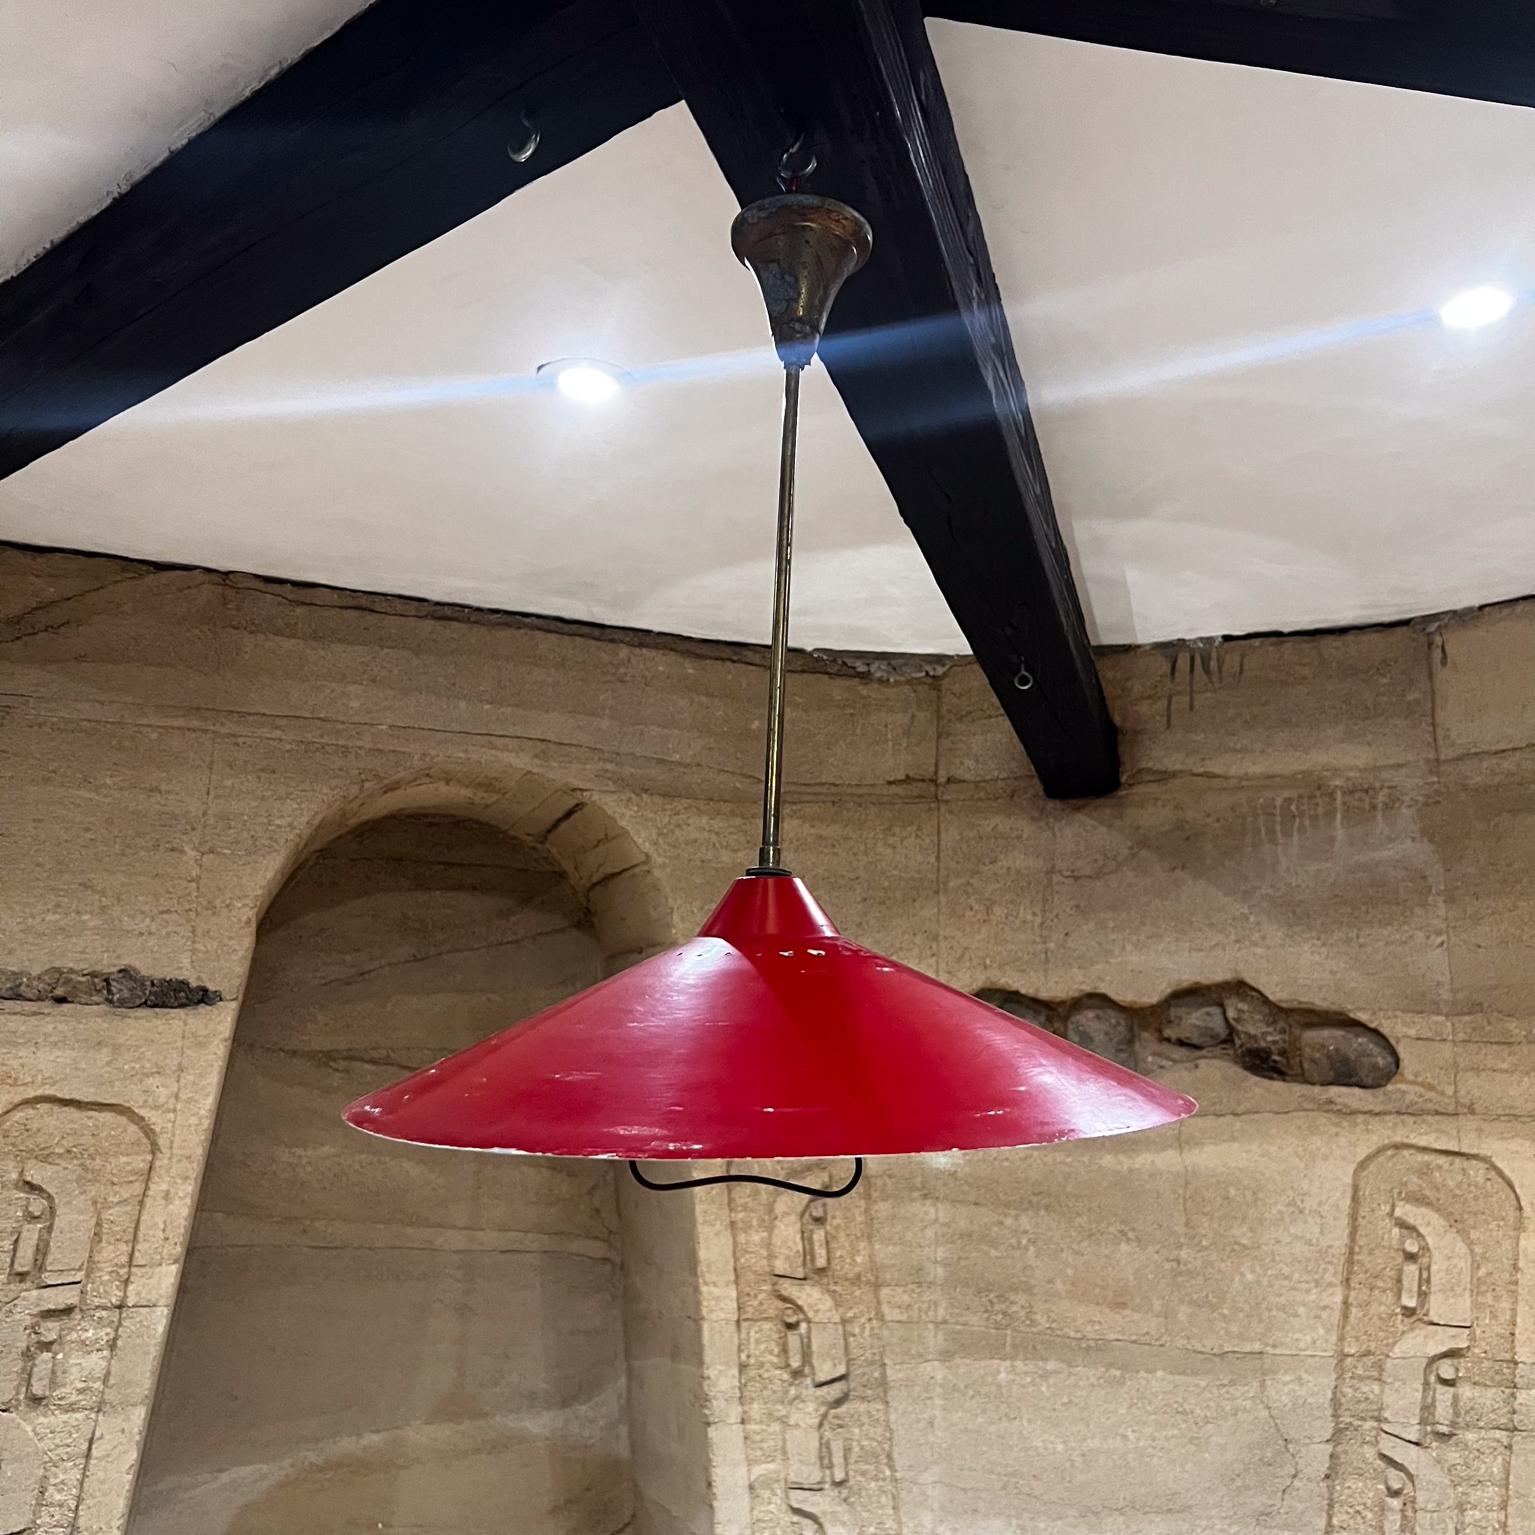 1950s Red Stilnovo Hanging Pendant Lamp Italy
in aluminum and brass
unsigned
18.75 diameter x 22.5 tall
Preowned original unrestored vintage condition.
Expect vintage wear, a few dents and dings on original paint.
Please see images.